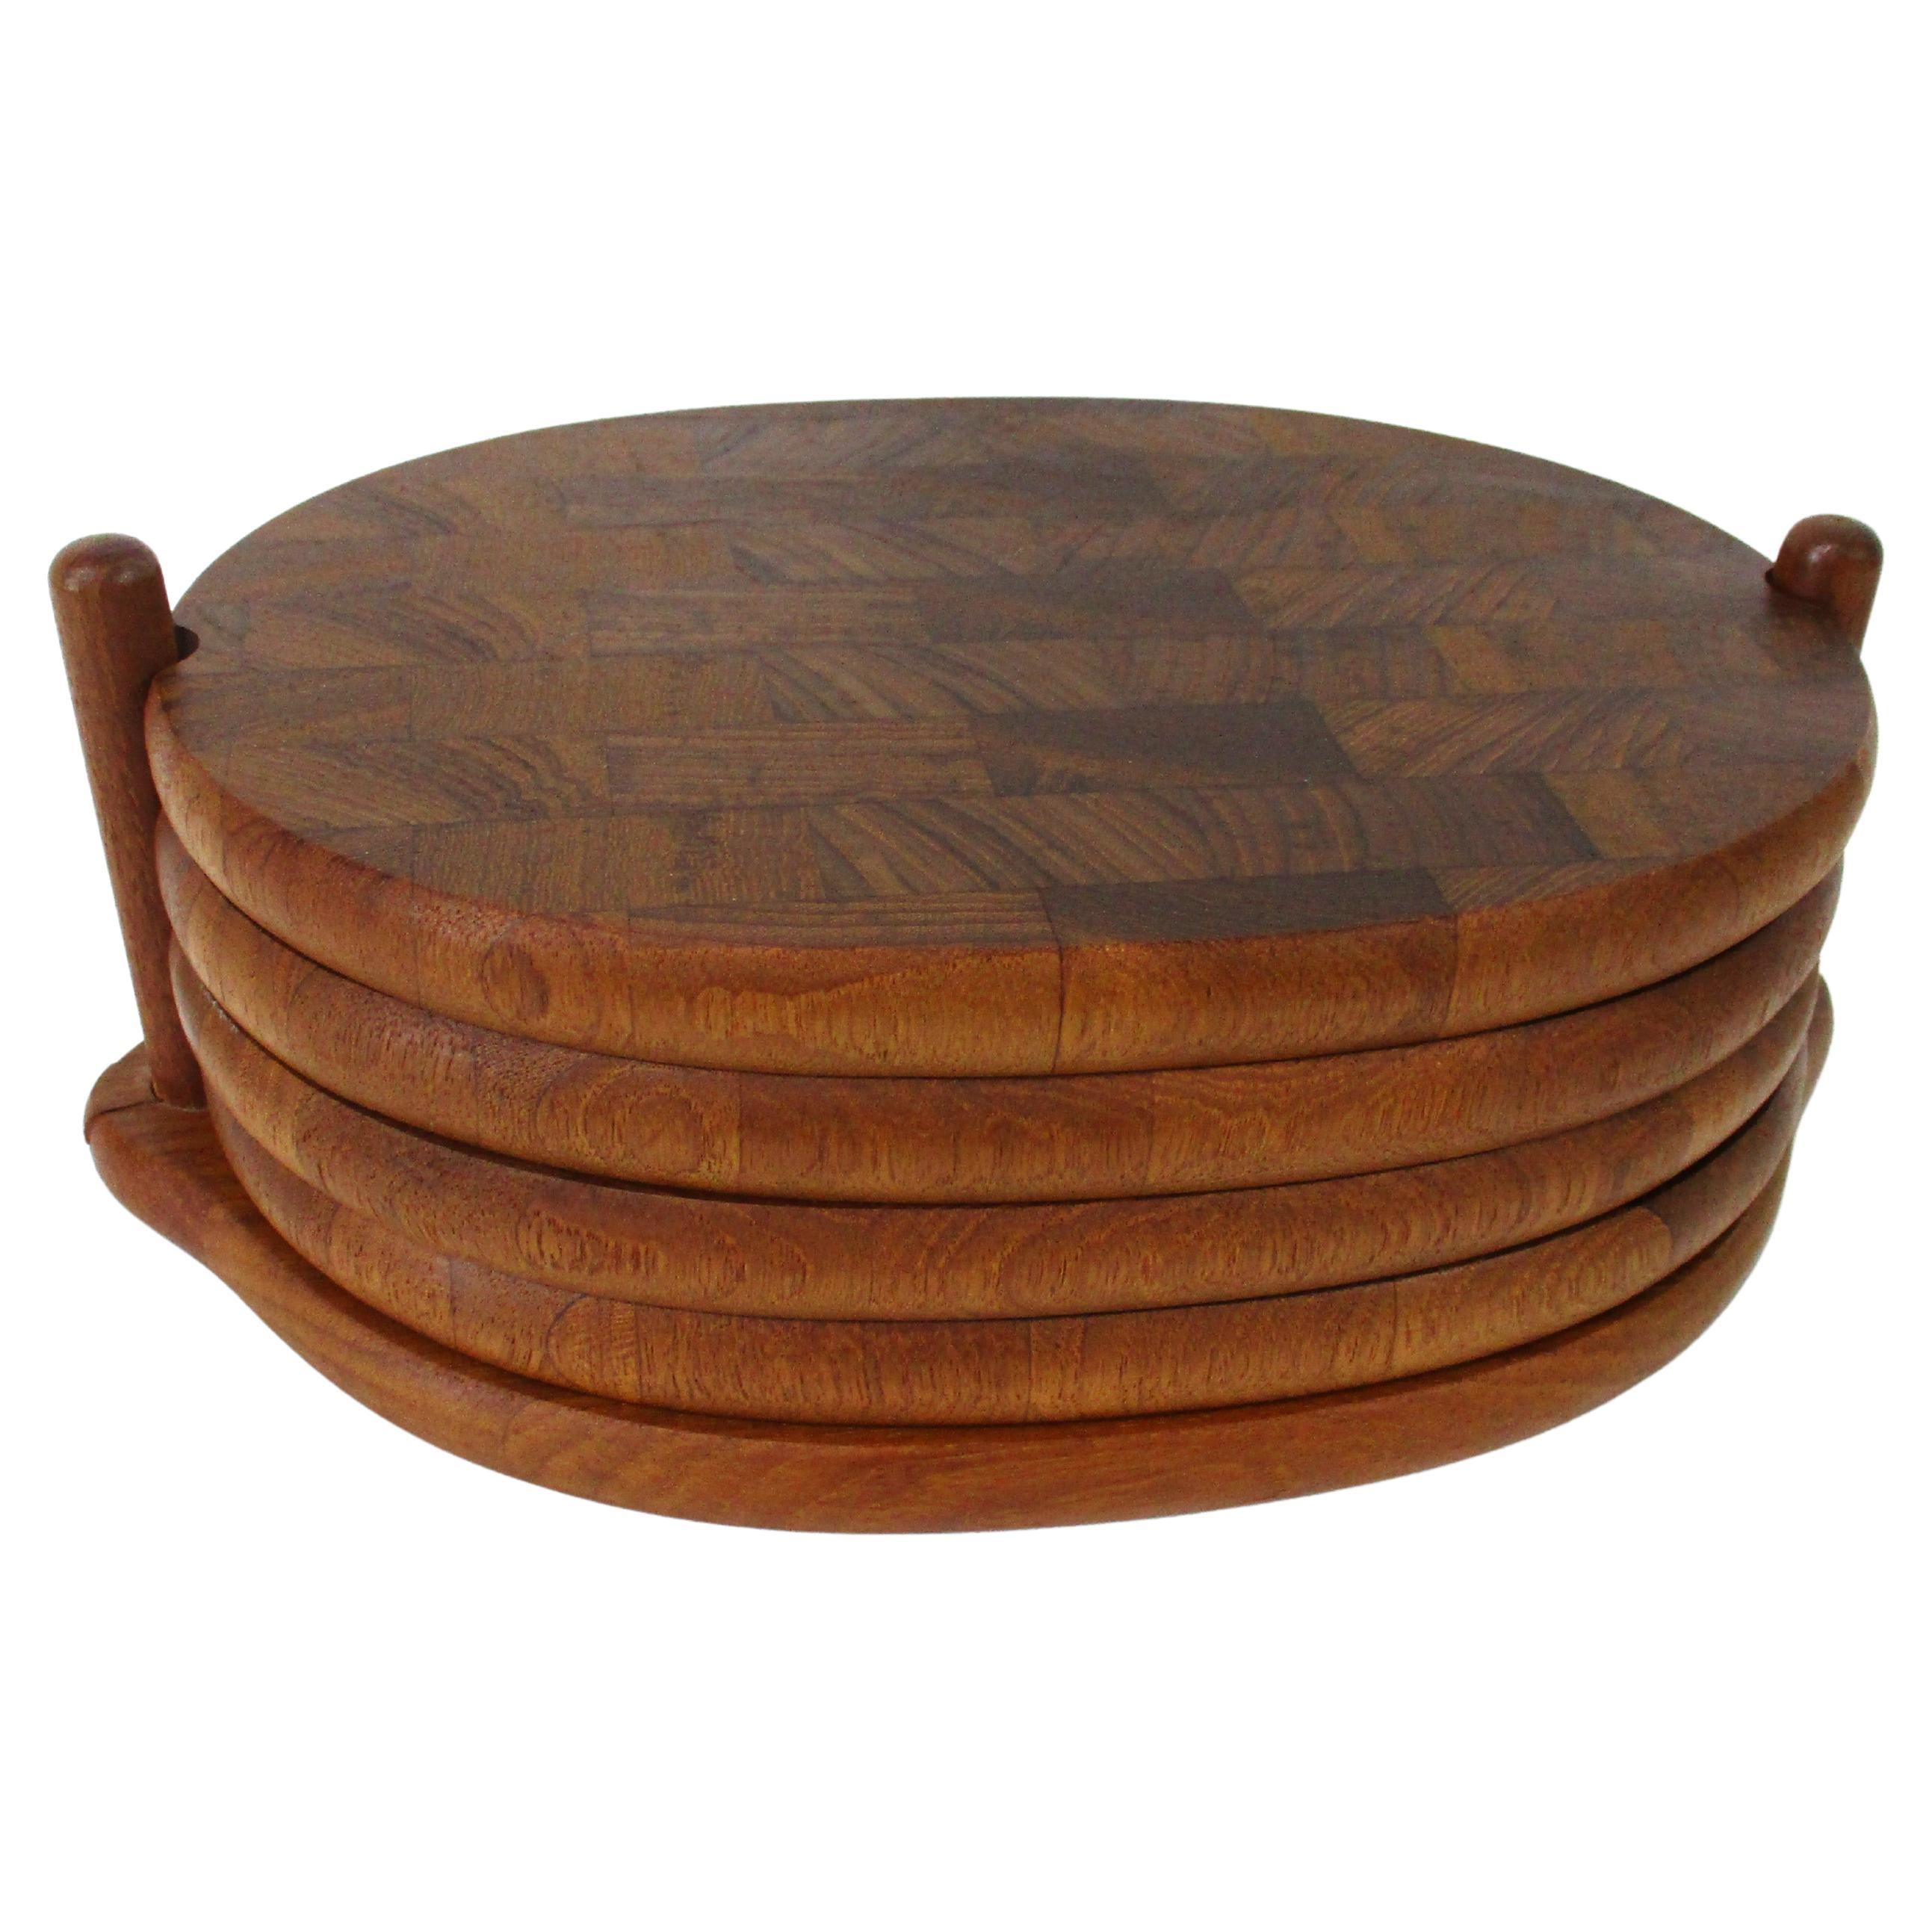 Individual Teak Charcuterie Serving Trays with Holder by Digsmed Denmark